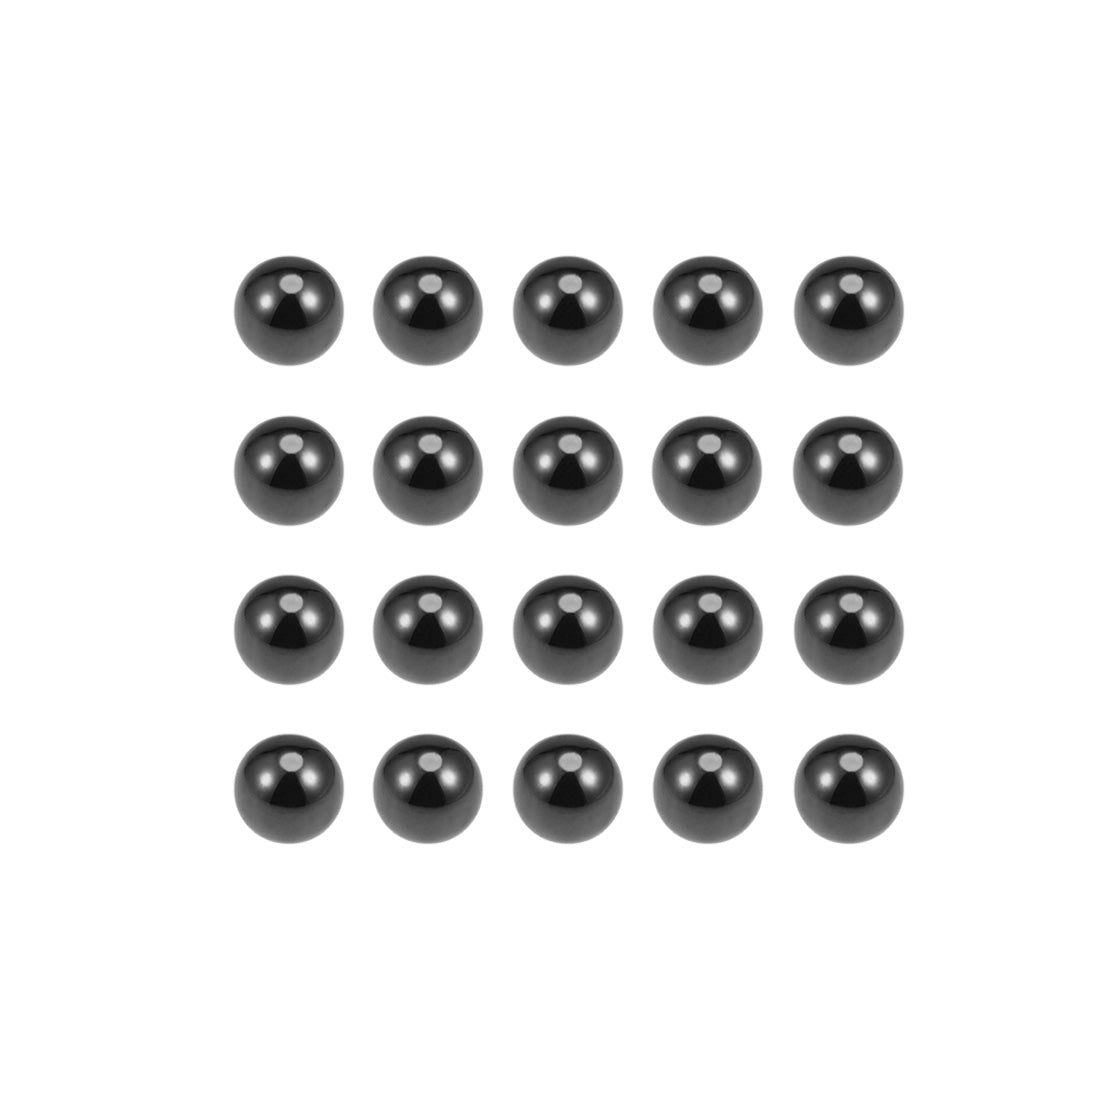 Uxcell Uxcell 1mm Ceramic Bearing Balls, Si3N4 Silicon Nitride Ball G5 Precision 20pcs